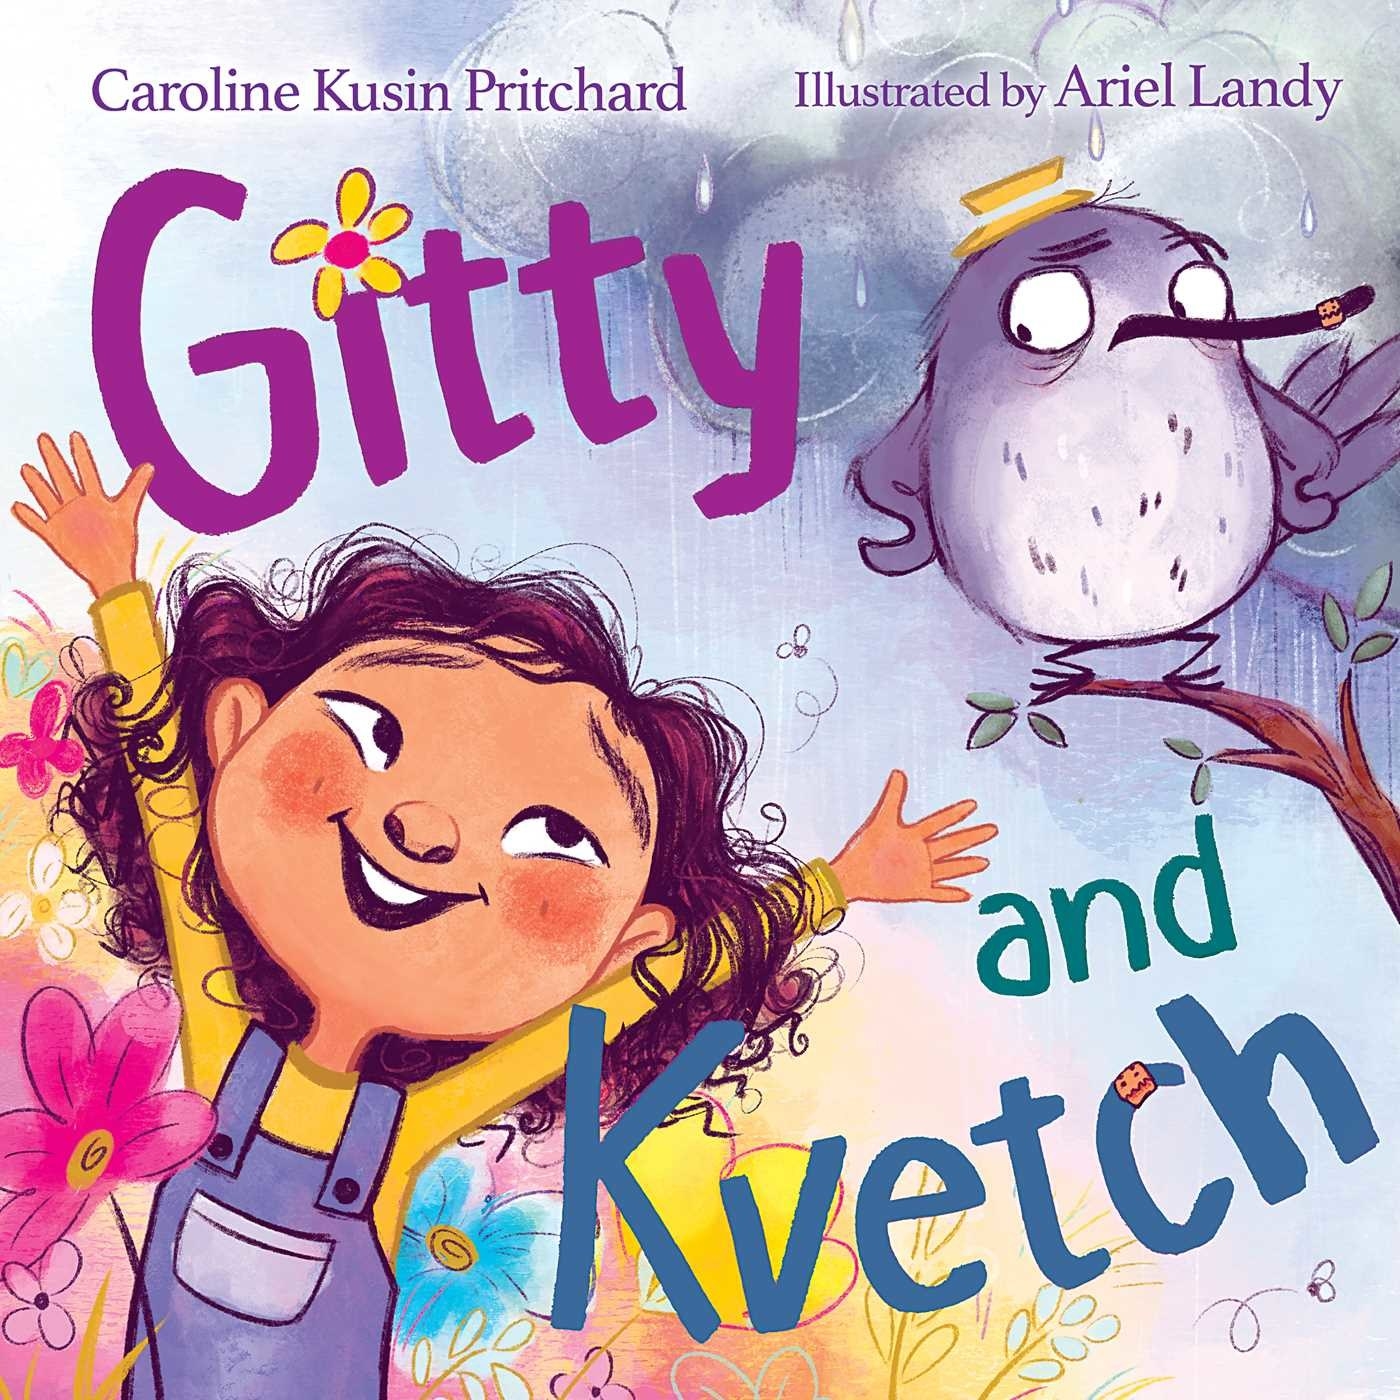 A young white girl with curly hair smiles and has her arms raised out, standing in a patch of flowers. She is wearing a yellow shirt and blue overalls. A bird with a hat looks at her. There&#x27;s a rain cloud behind him. The title reads: Gitty and Kvetch